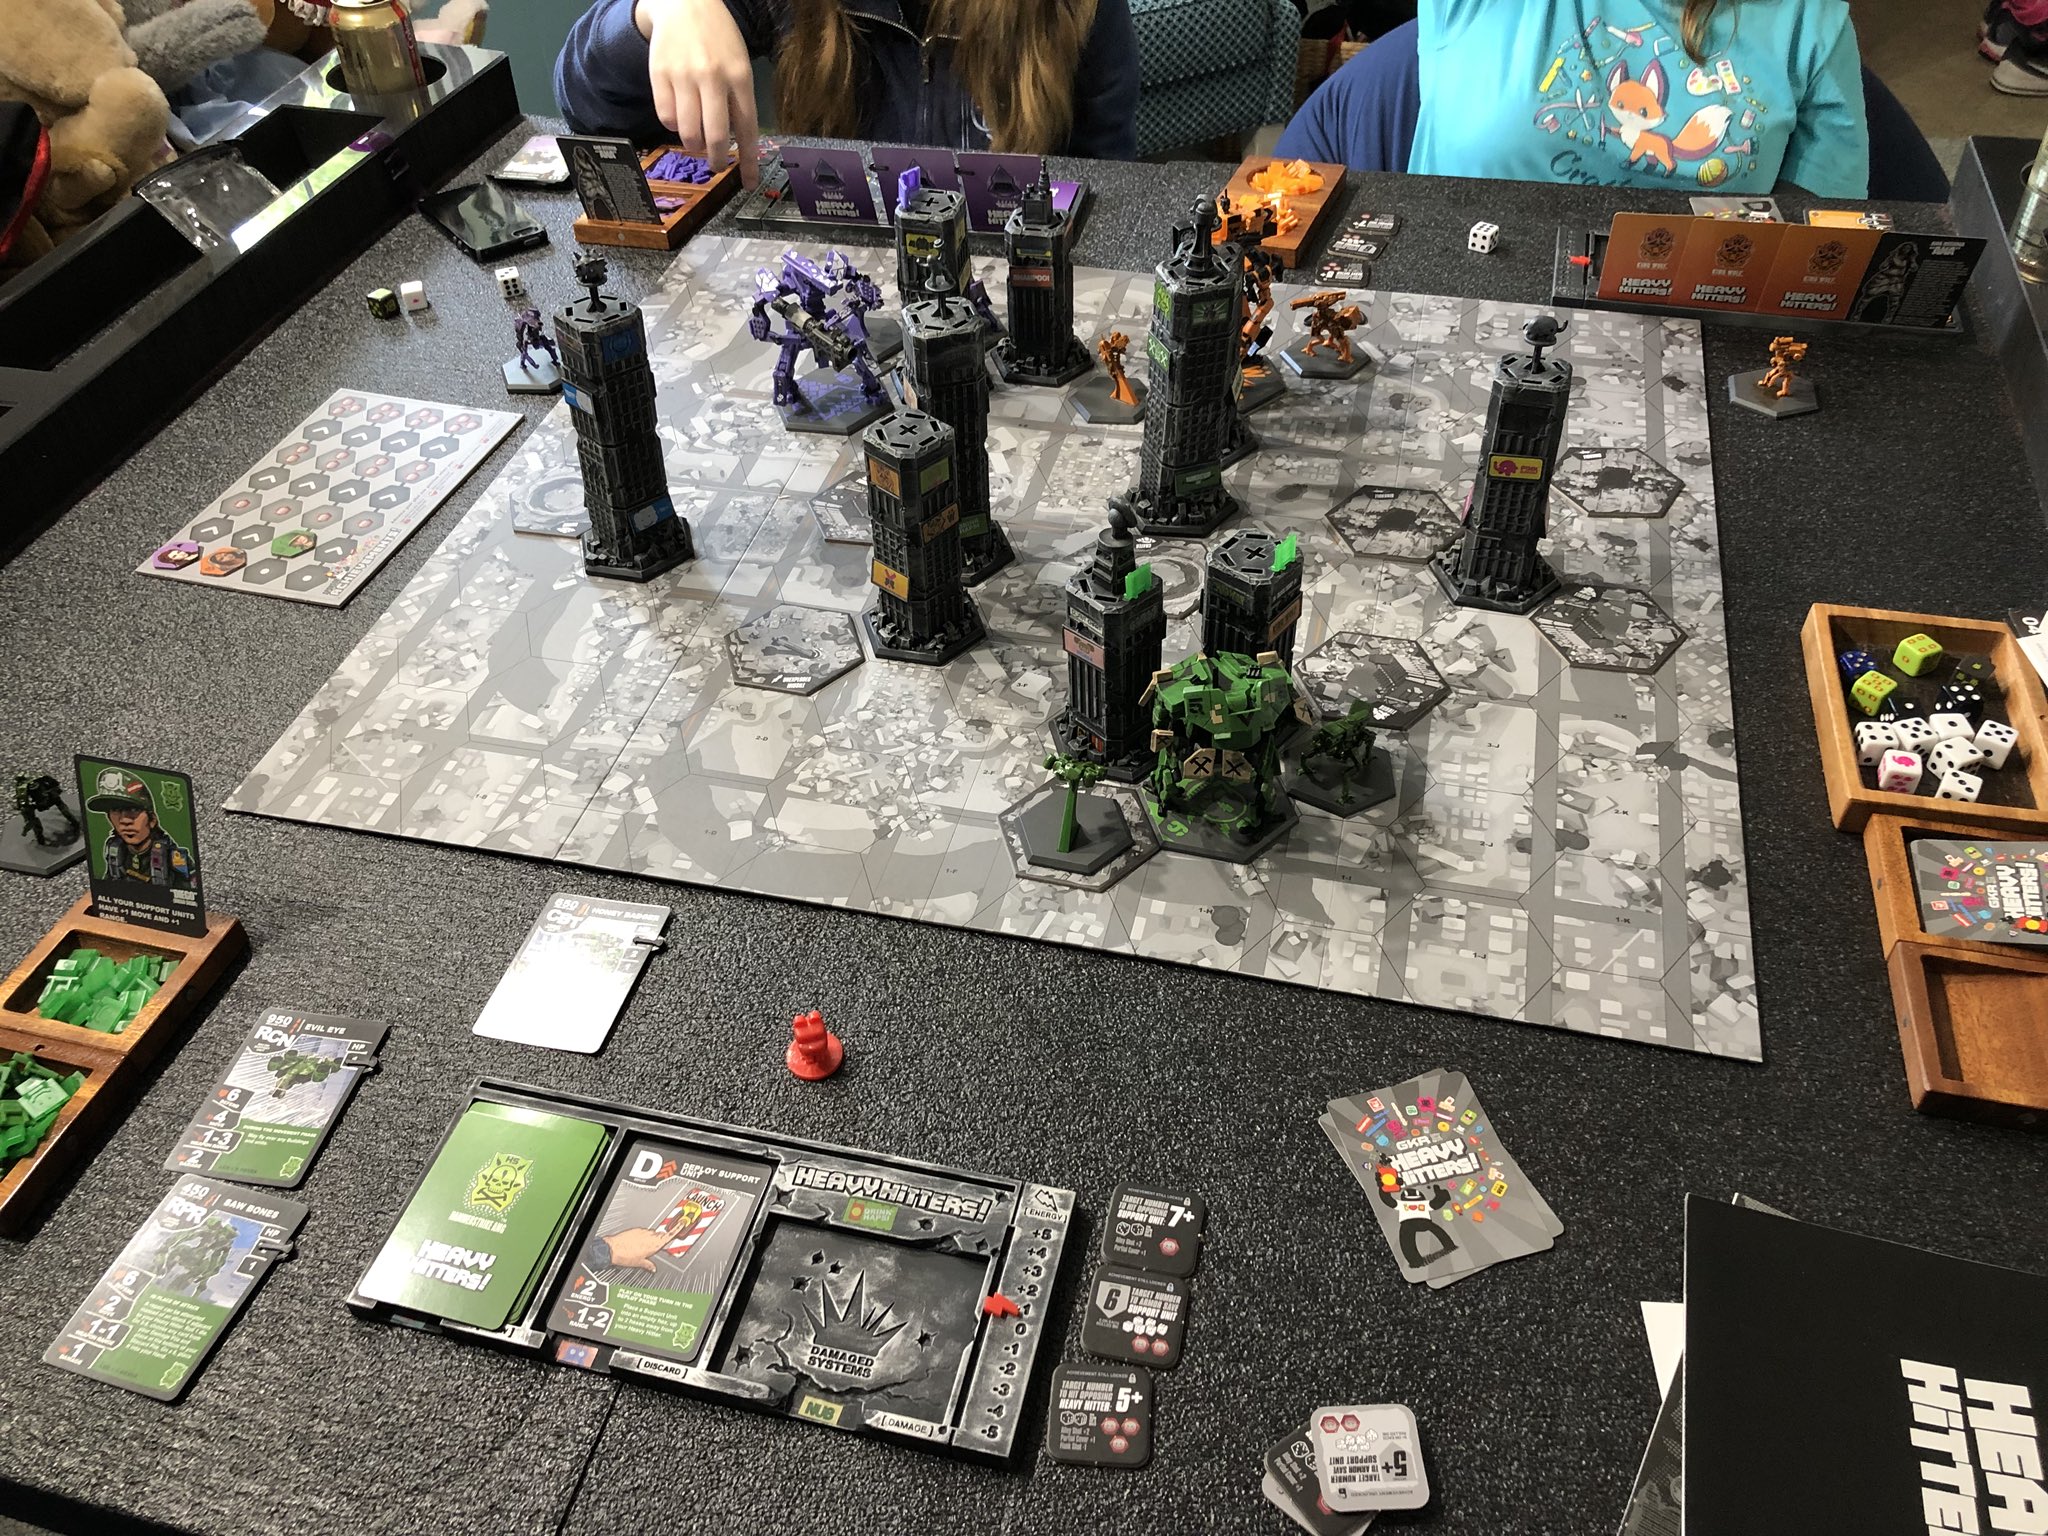 Episode 227: Warhammer - The Heavy Metal of Board Games